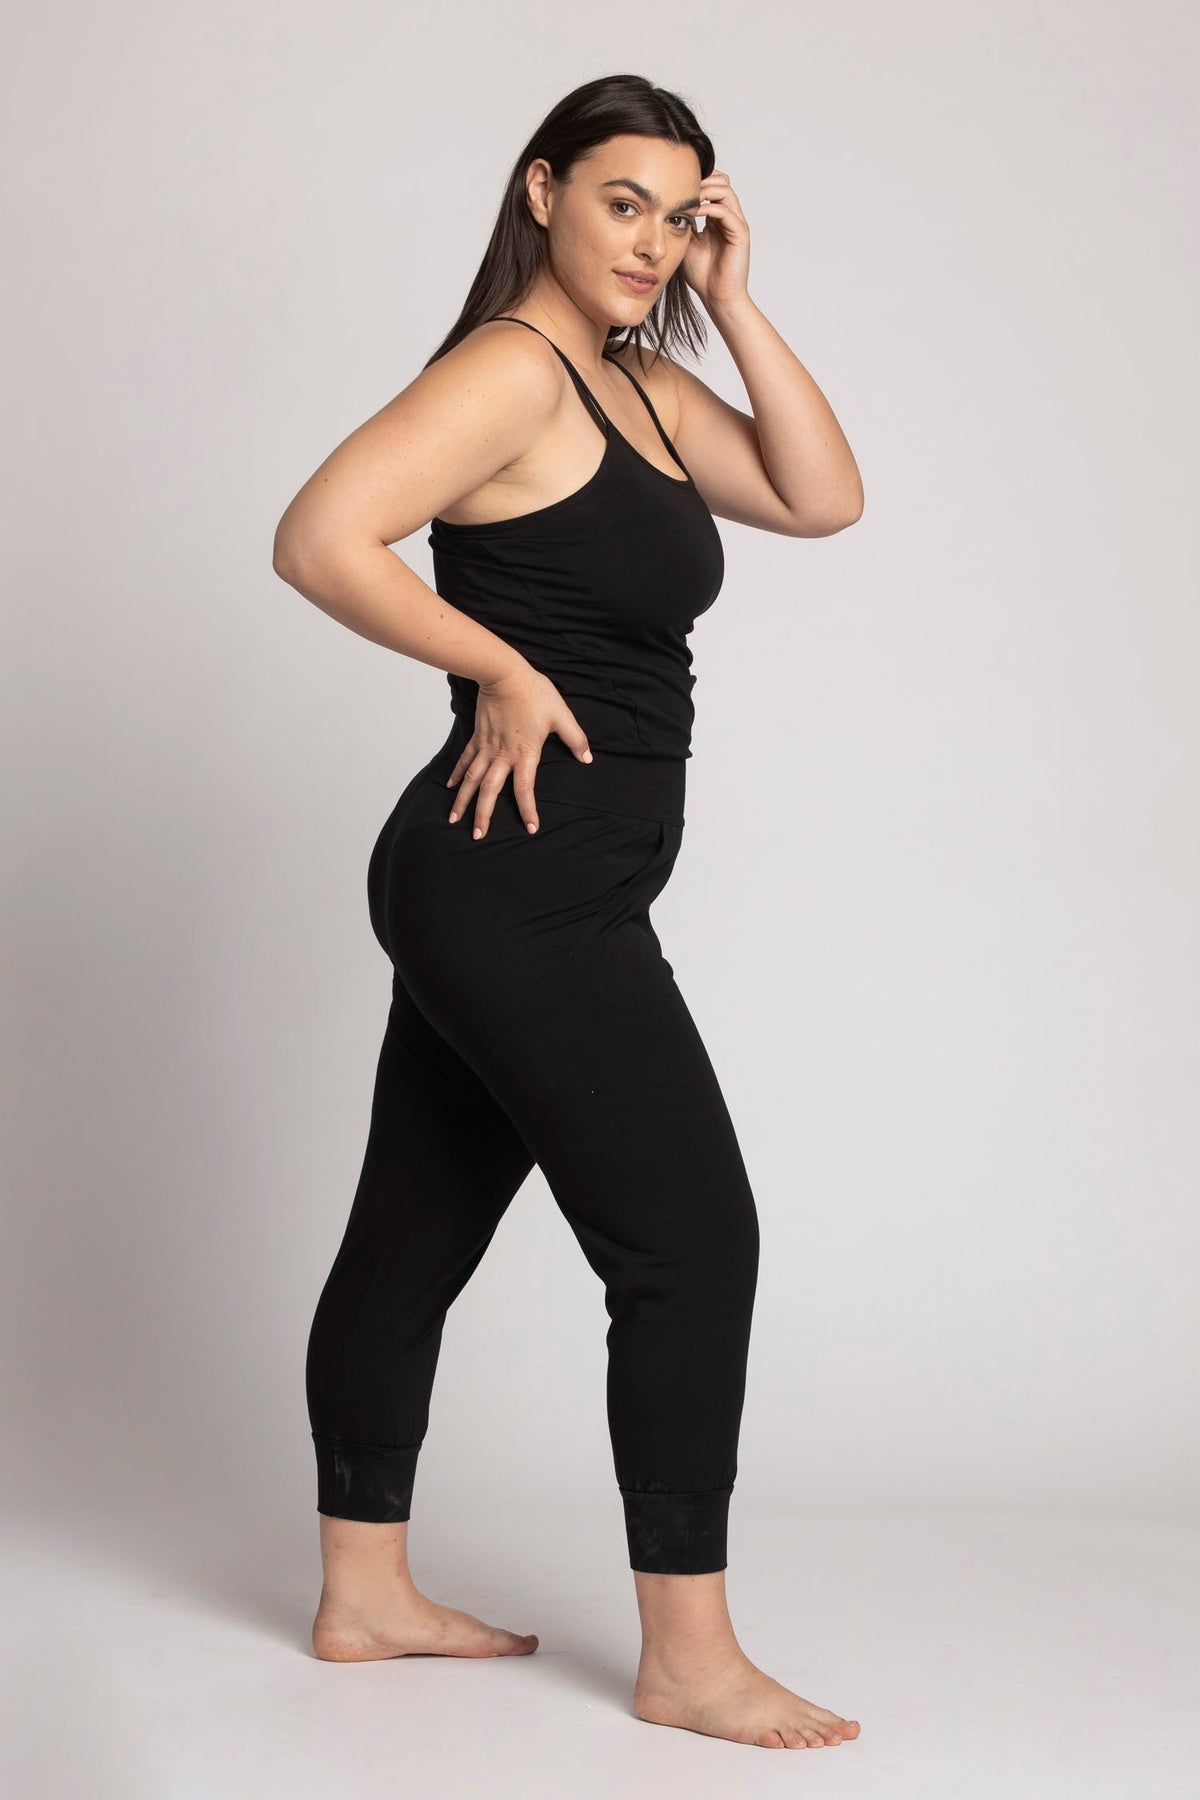 50%off I’mPerfect Yoga Jumpsuit was 35%off